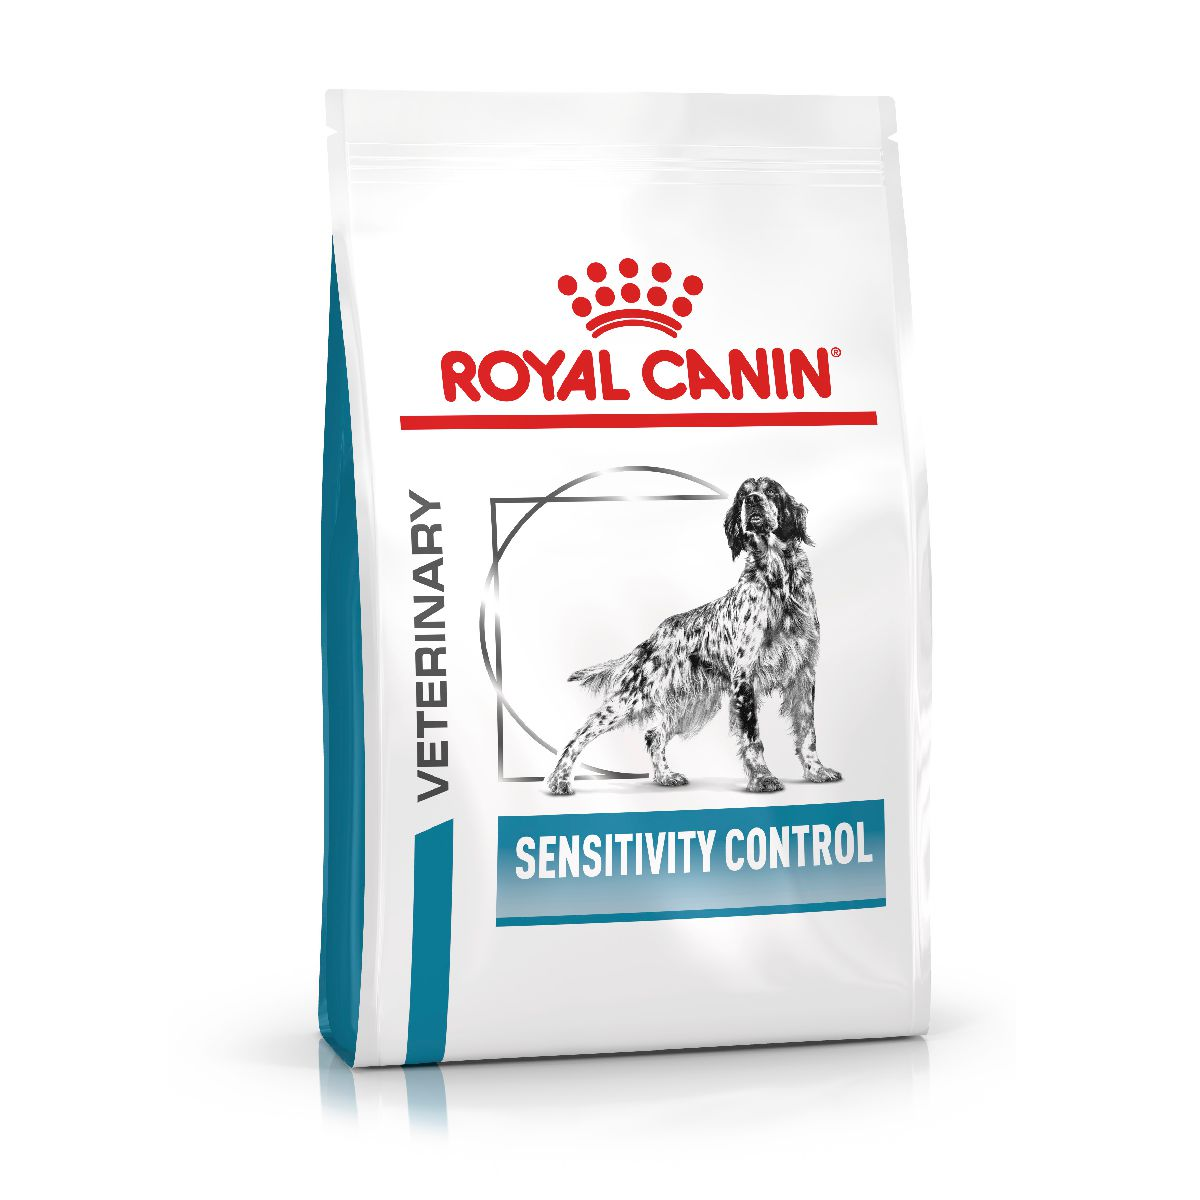 royal canin duck and tapioca